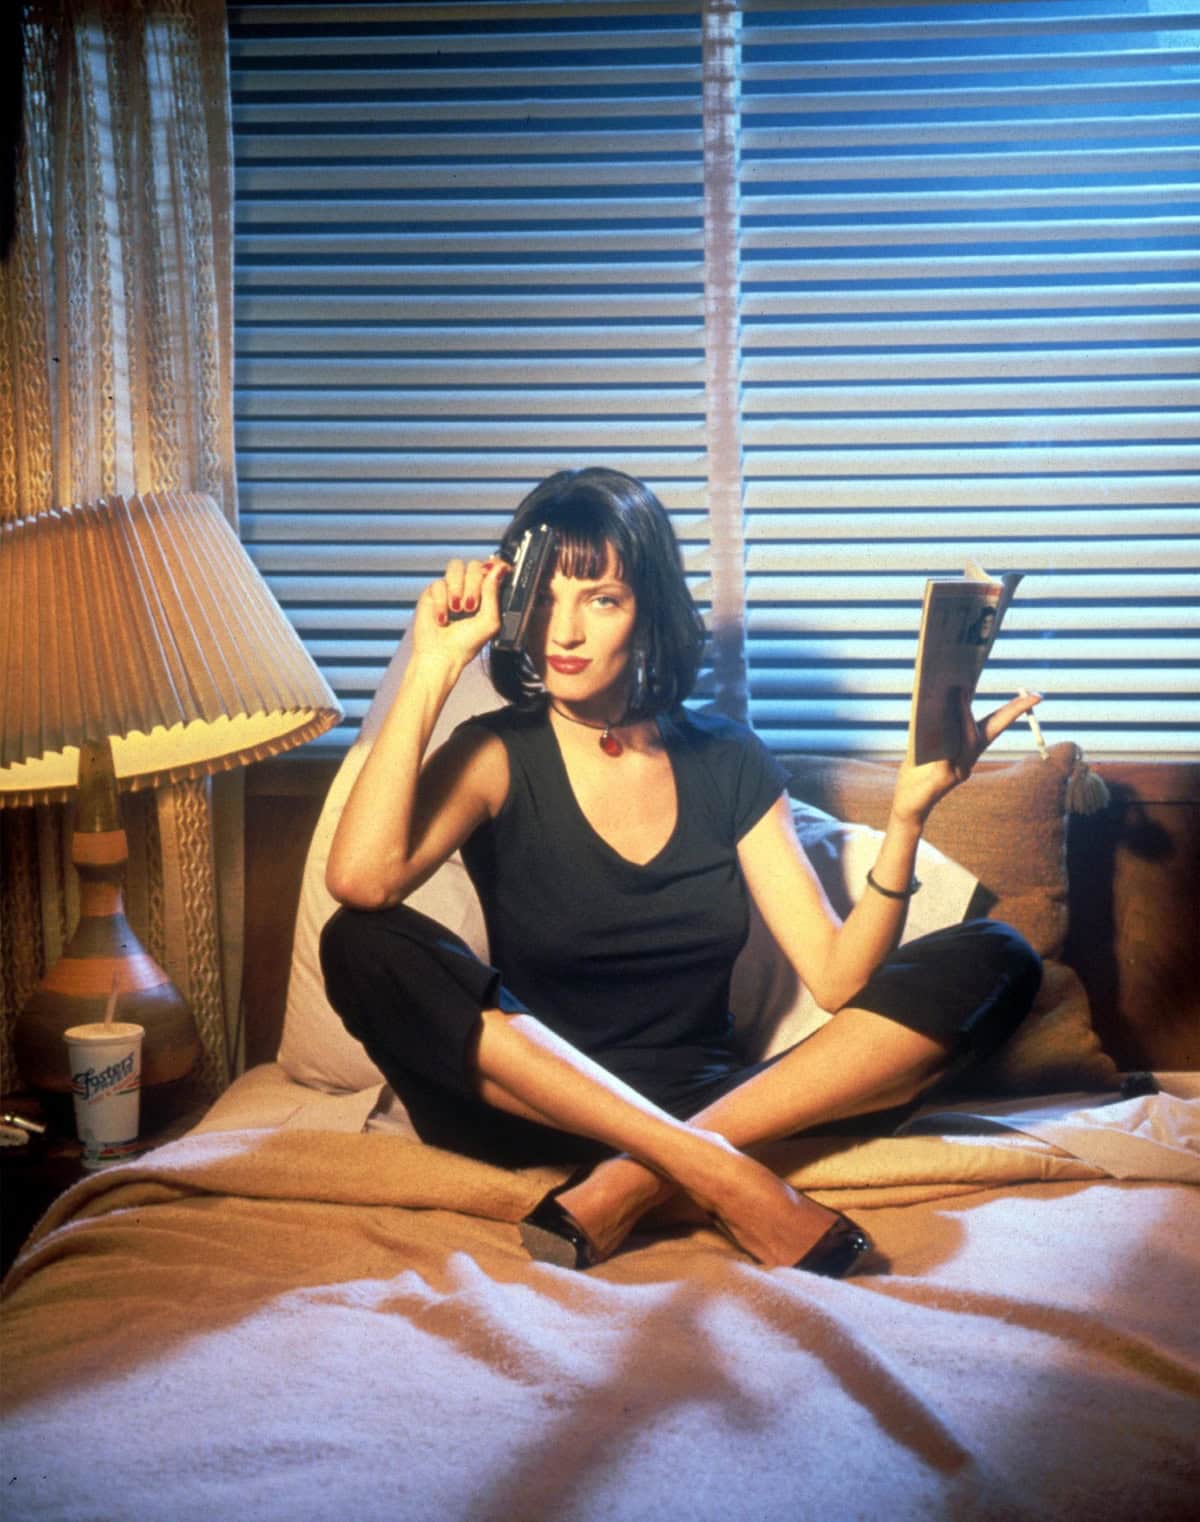 30 years later, Uma Thurman's portrayal of Mia Wallace remains iconic, a testament to a role that was highly contested but became hers, defining a generation at the 2024 TCM Classic Film Festival